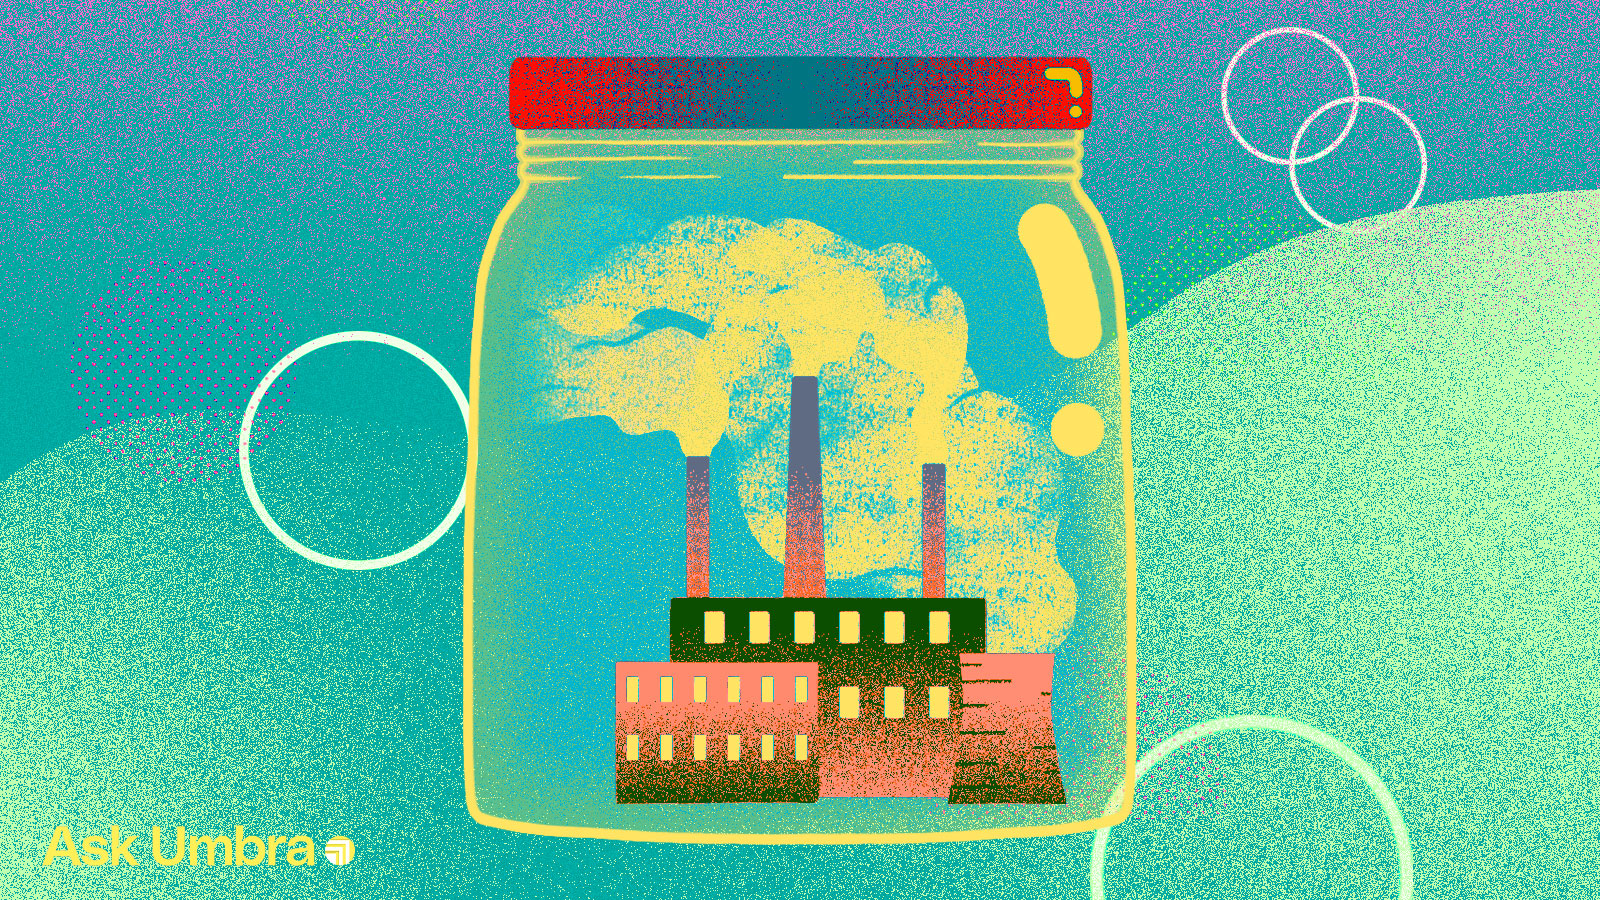 Illustration: A factory enclosed in a glass jar